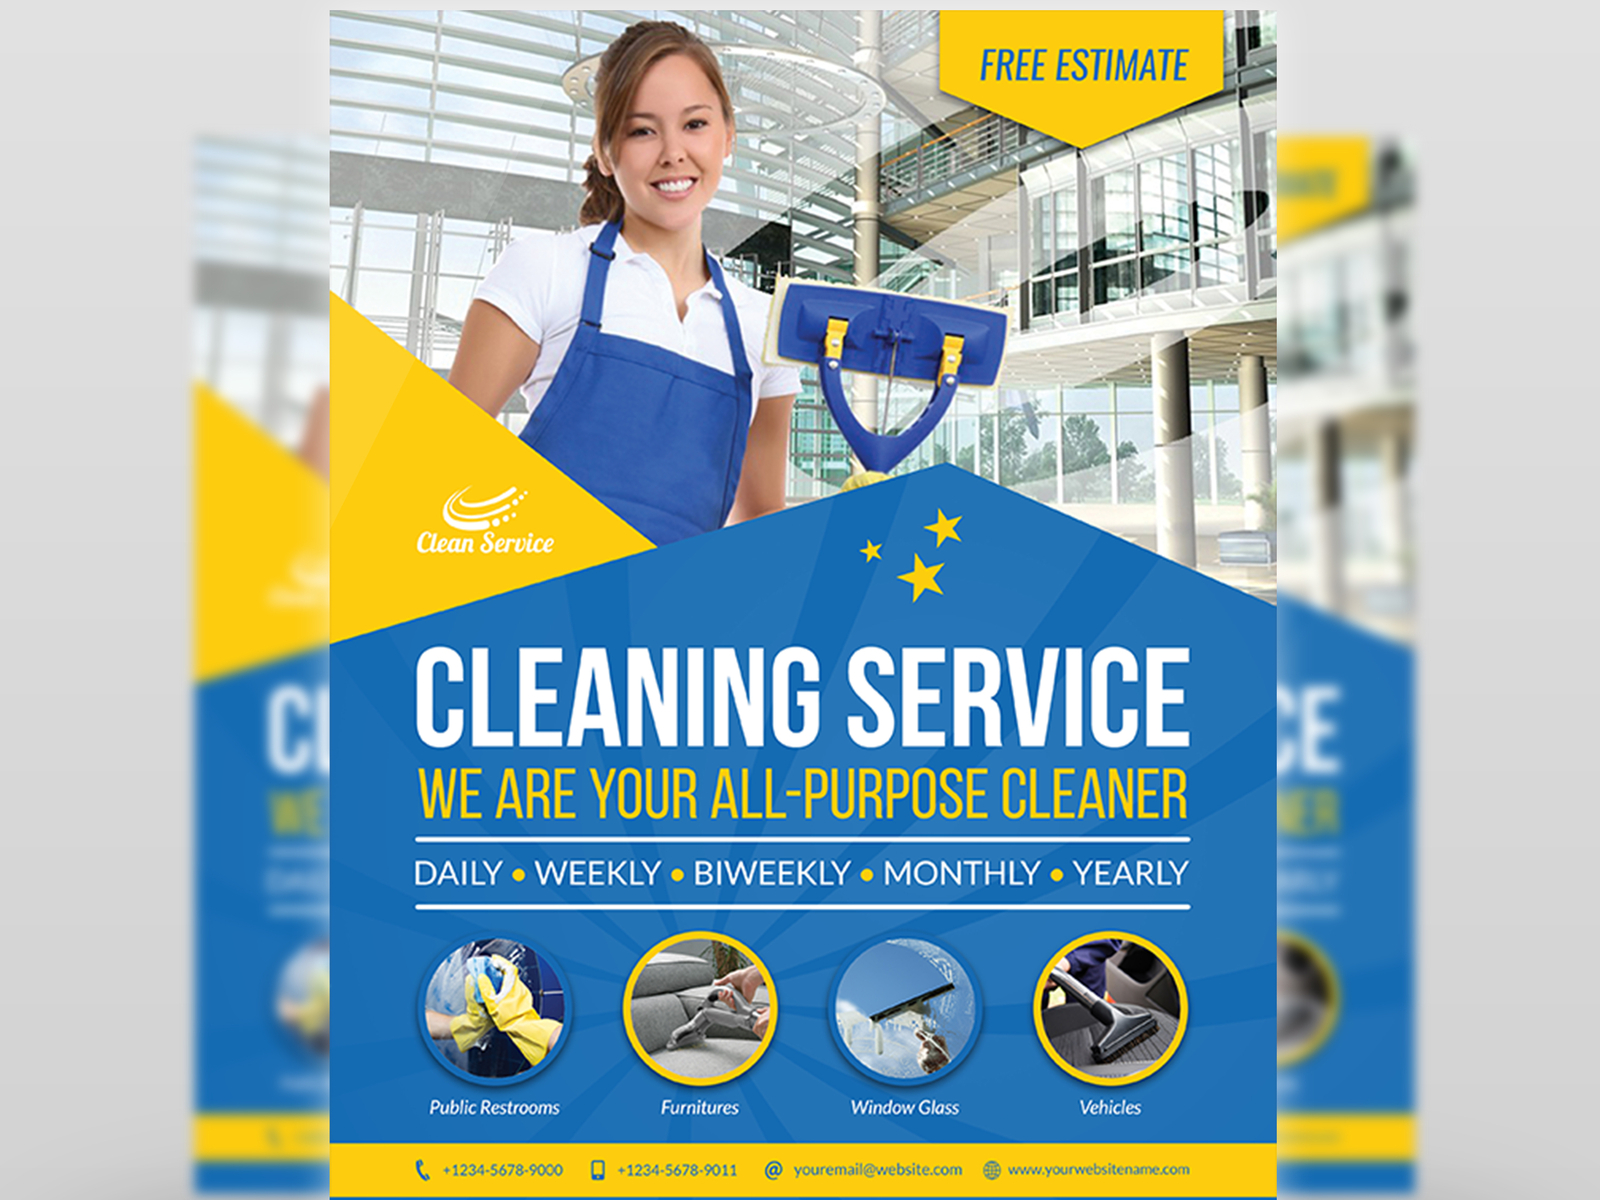 Cleaning Services Flyer Template by OWPictures on Dribbble Throughout Flyers For Cleaning Business Templates